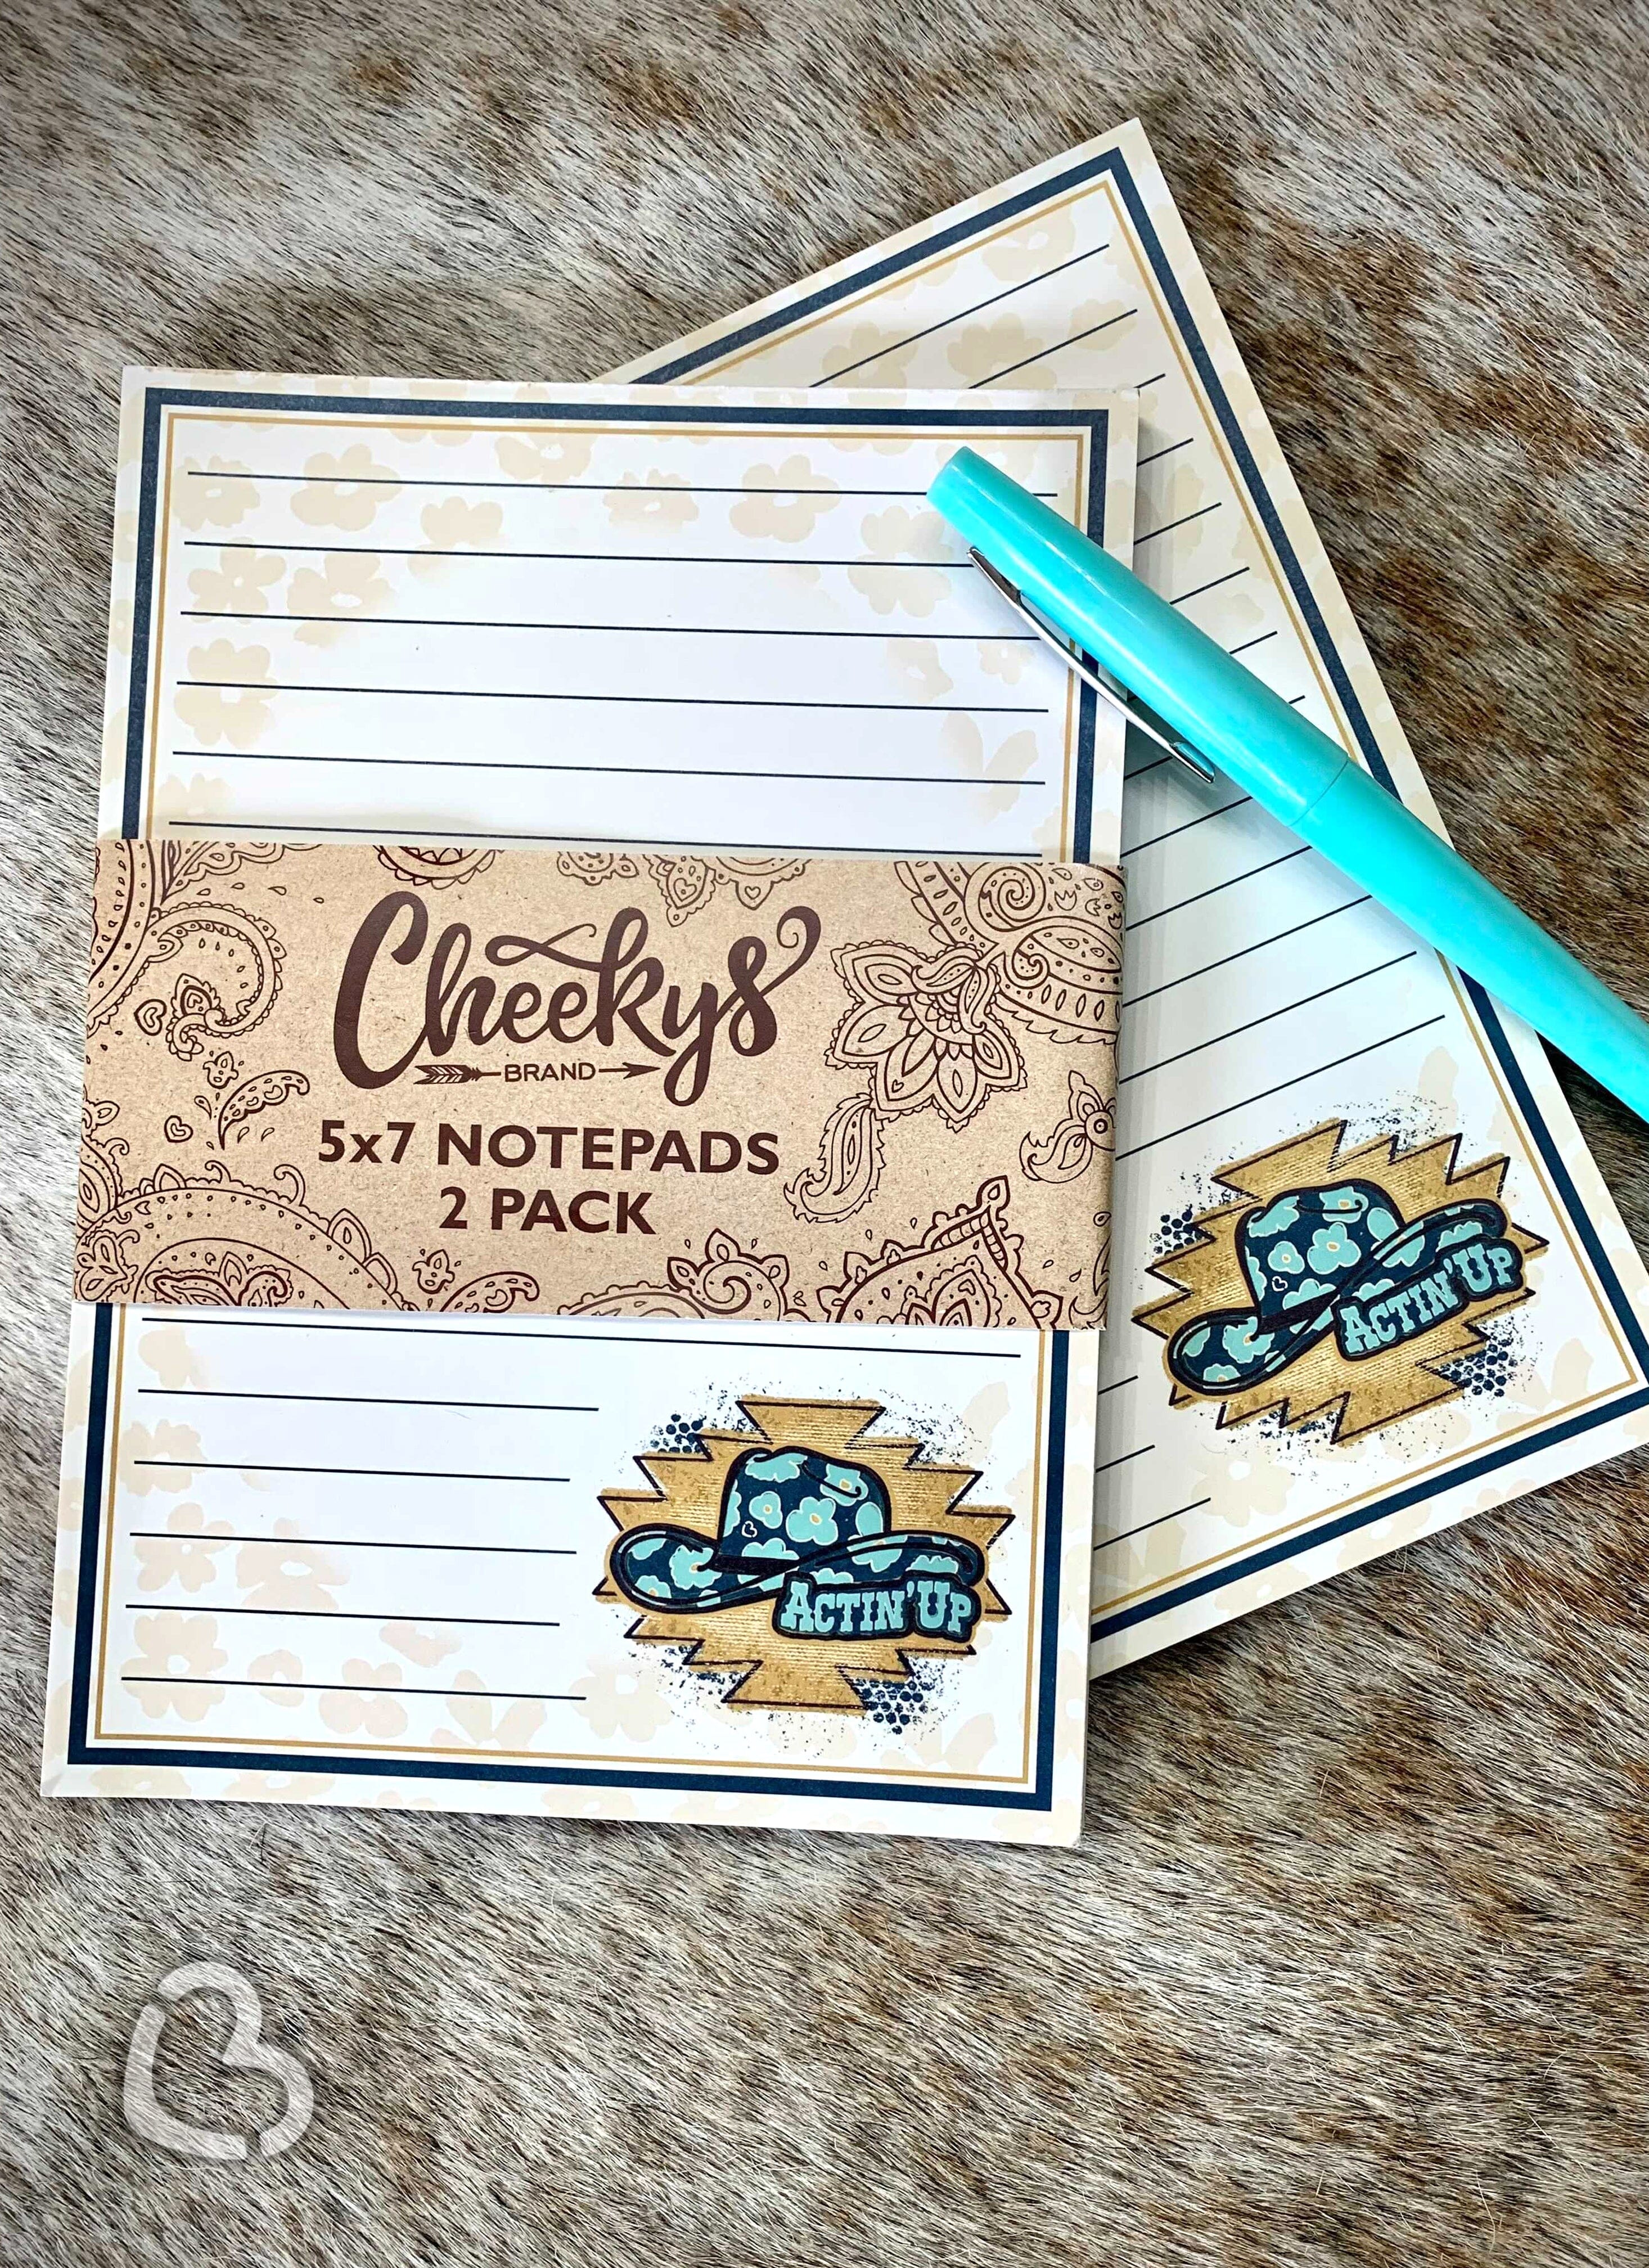 Actin' Up Cowgirl Note Pad Set of 2 Cheekys Brand 